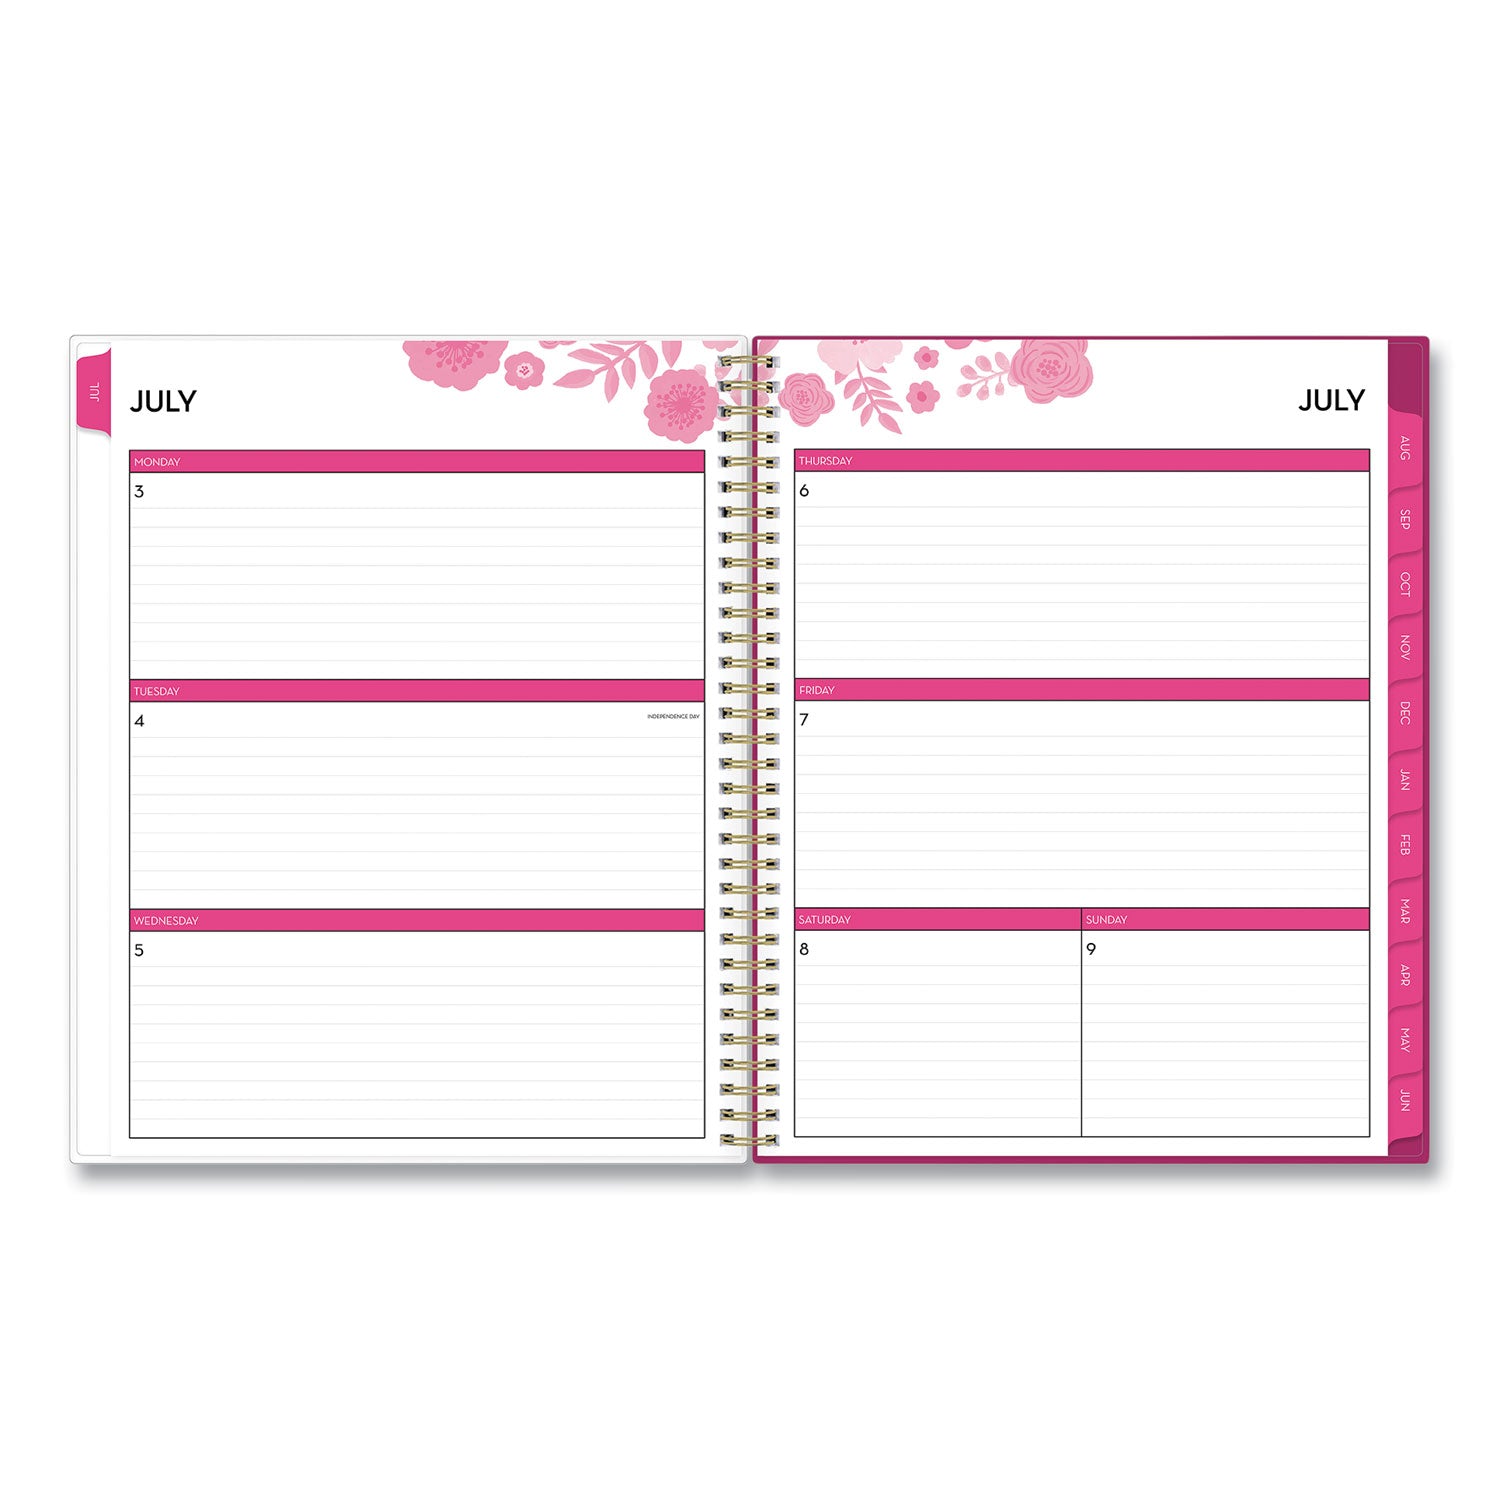 mahalo-academic-year-create-your-own-cover-weekly-monthly-planner-floral-artwork-11-x-85-12-month-july-june-2023-2024_bls100149 - 2